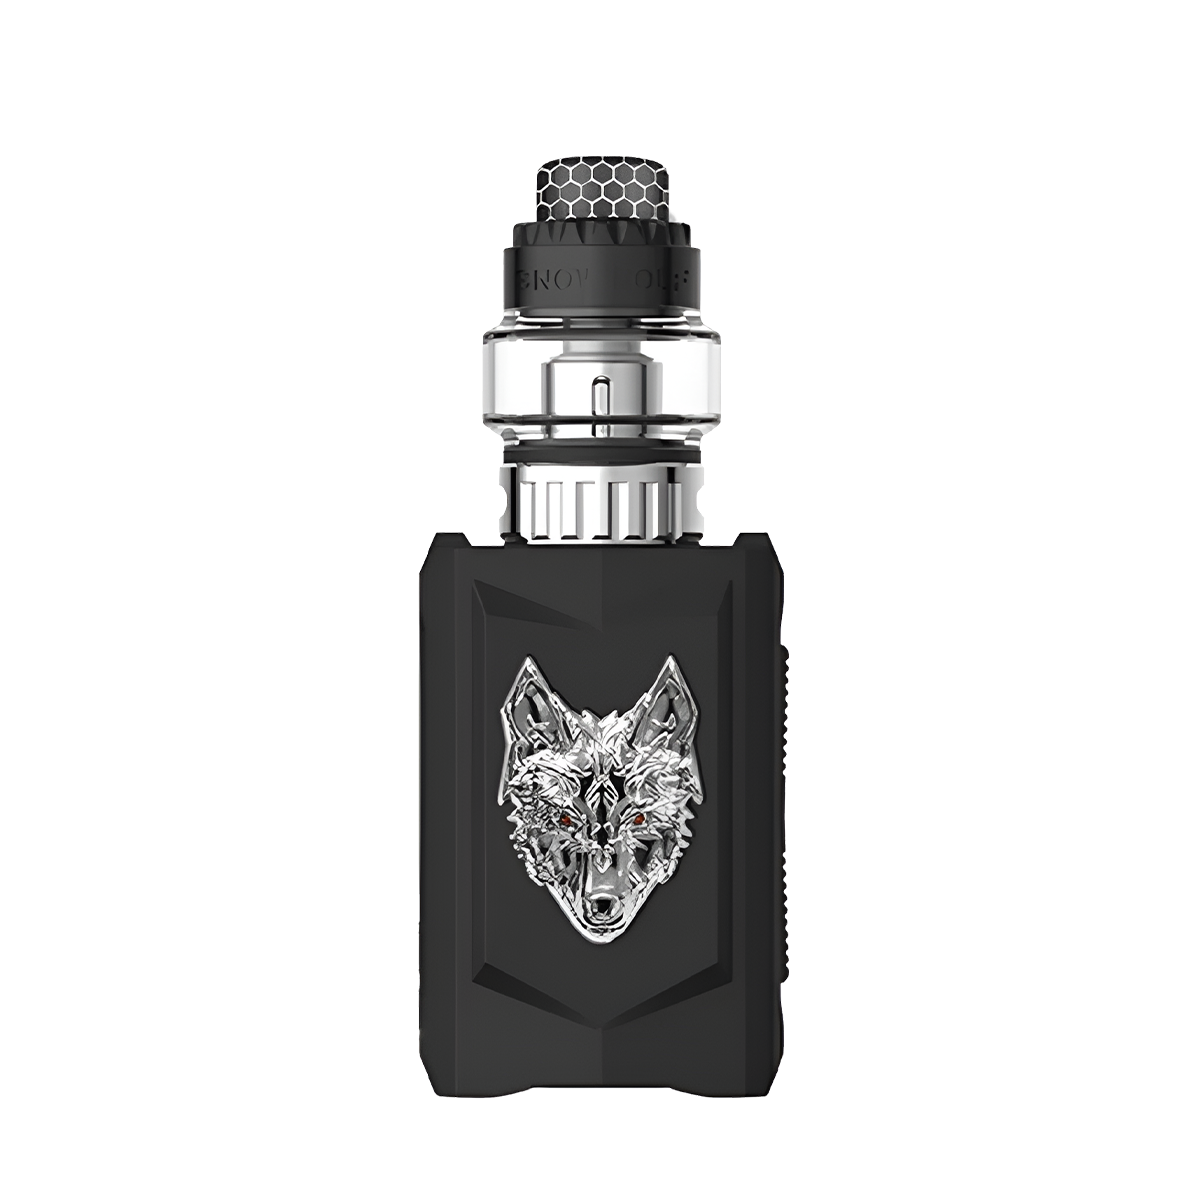 SnowWolf Mfeng Baby Advanced Mod Kit Black Stainless  